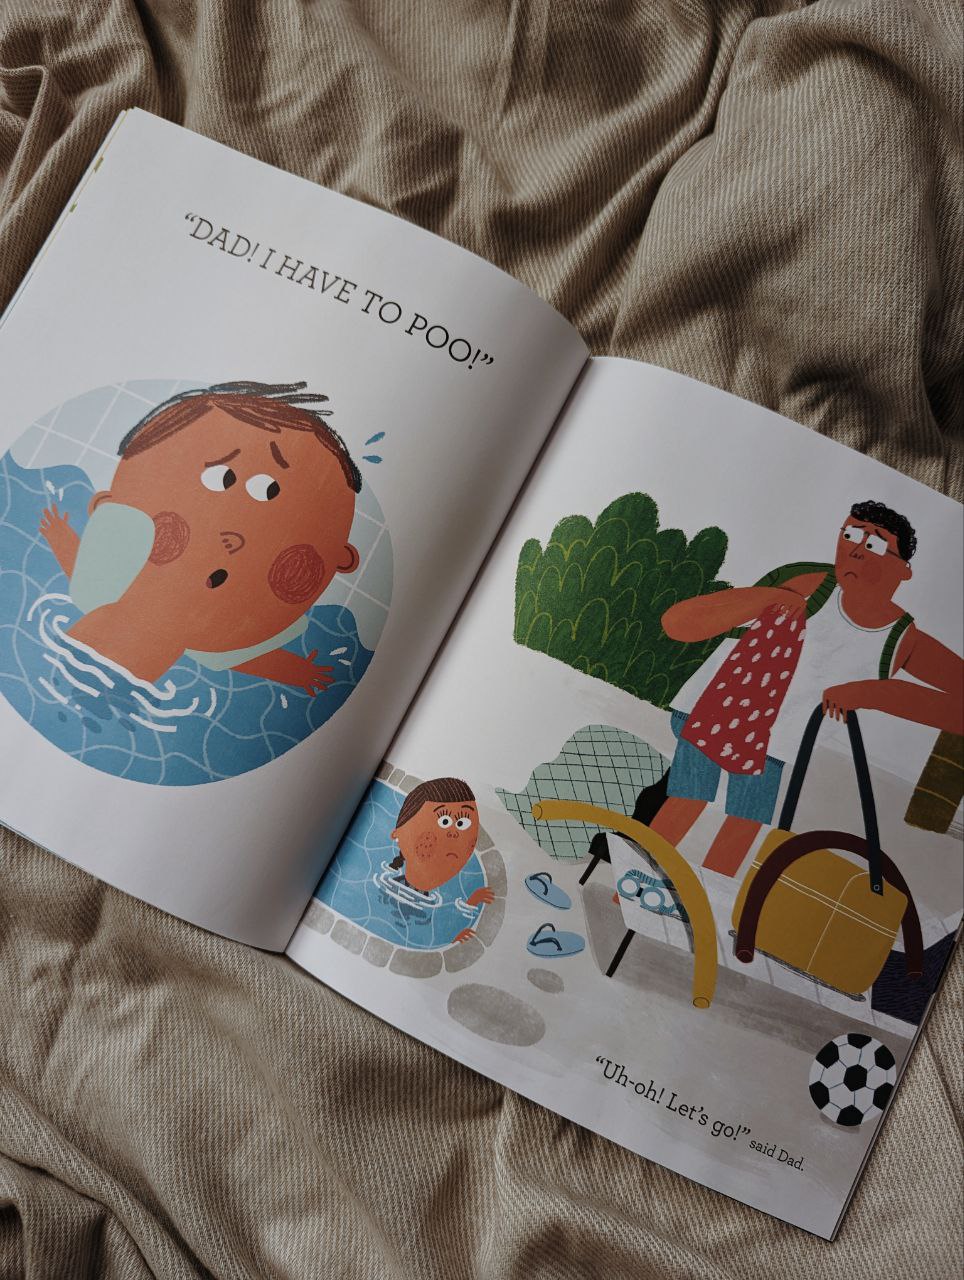 The Boy Who Cried Poo by Alessandra Requena